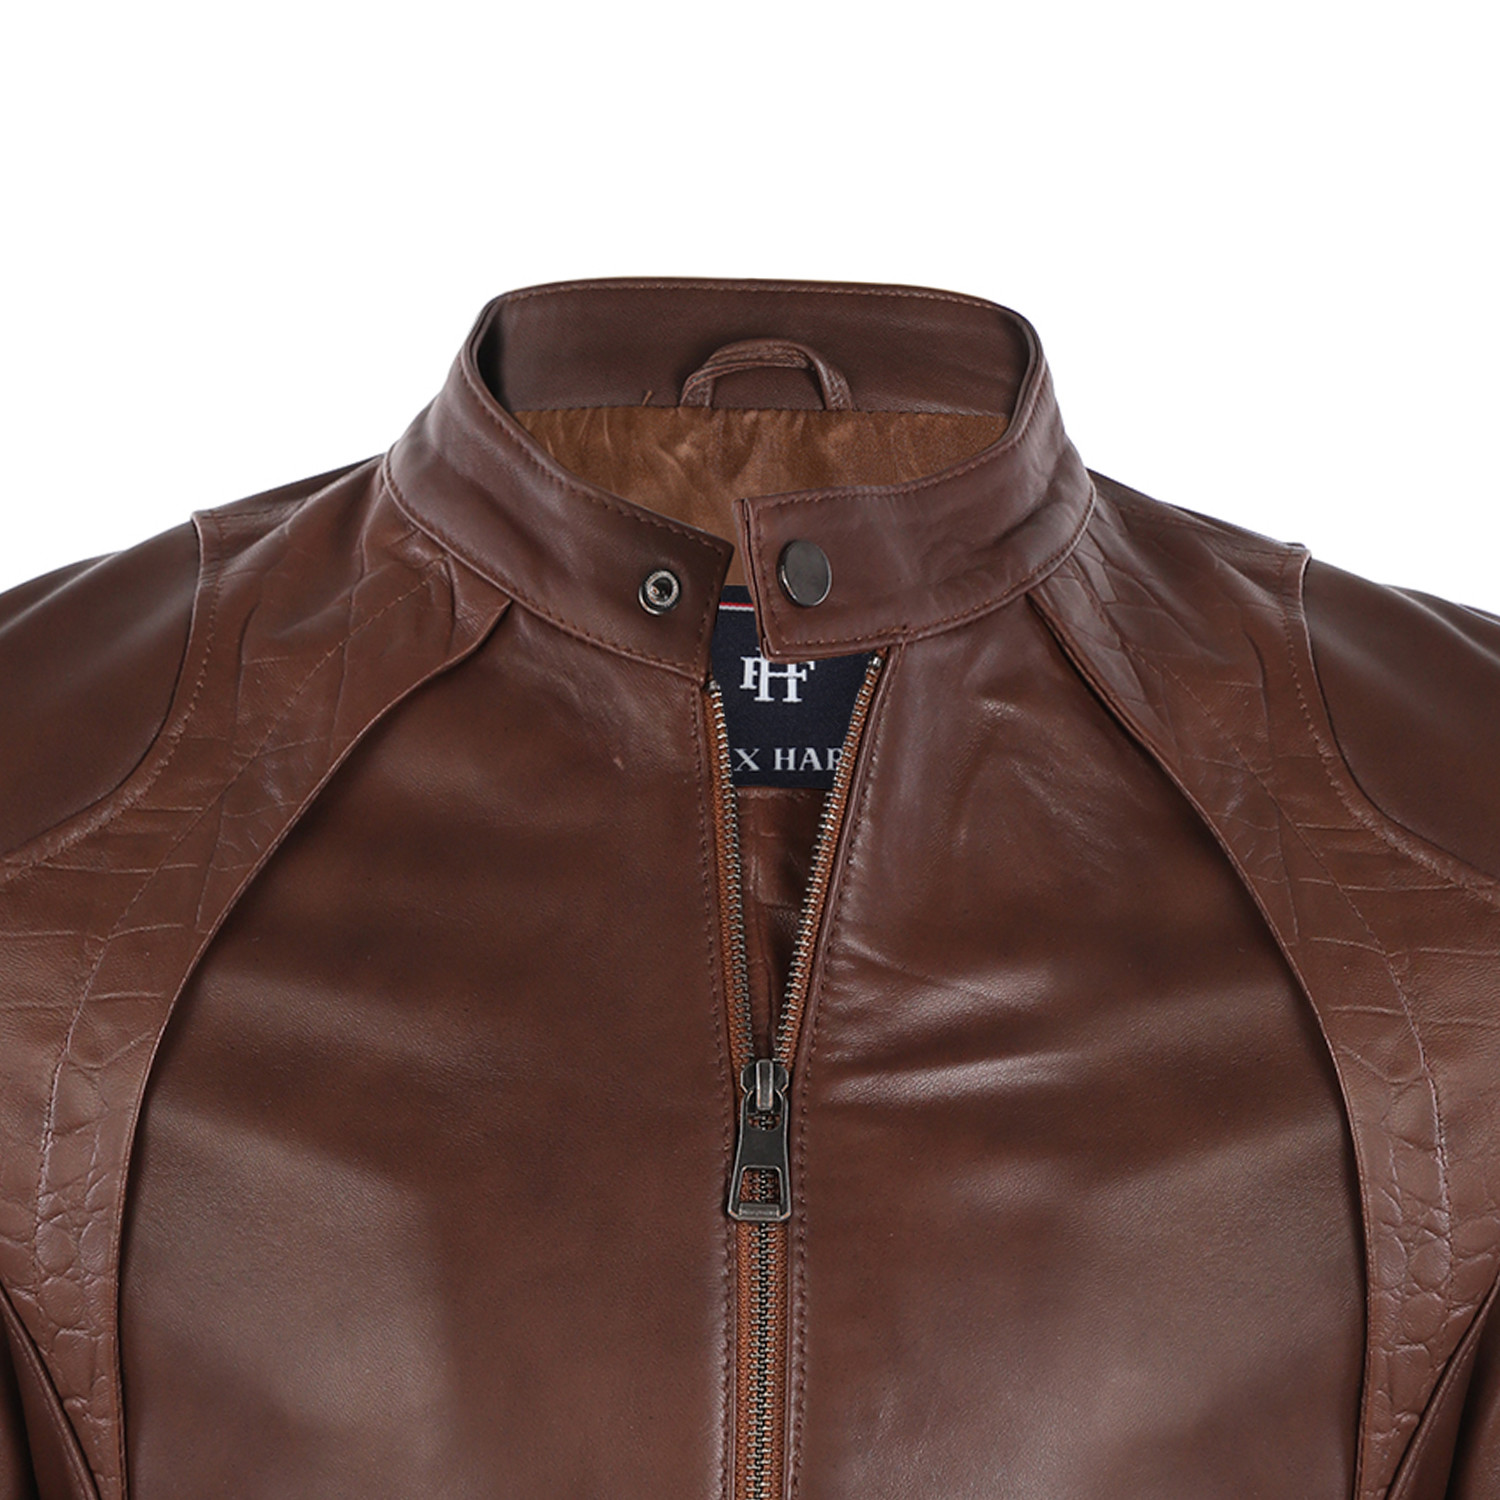 monte carlo leather jacket price